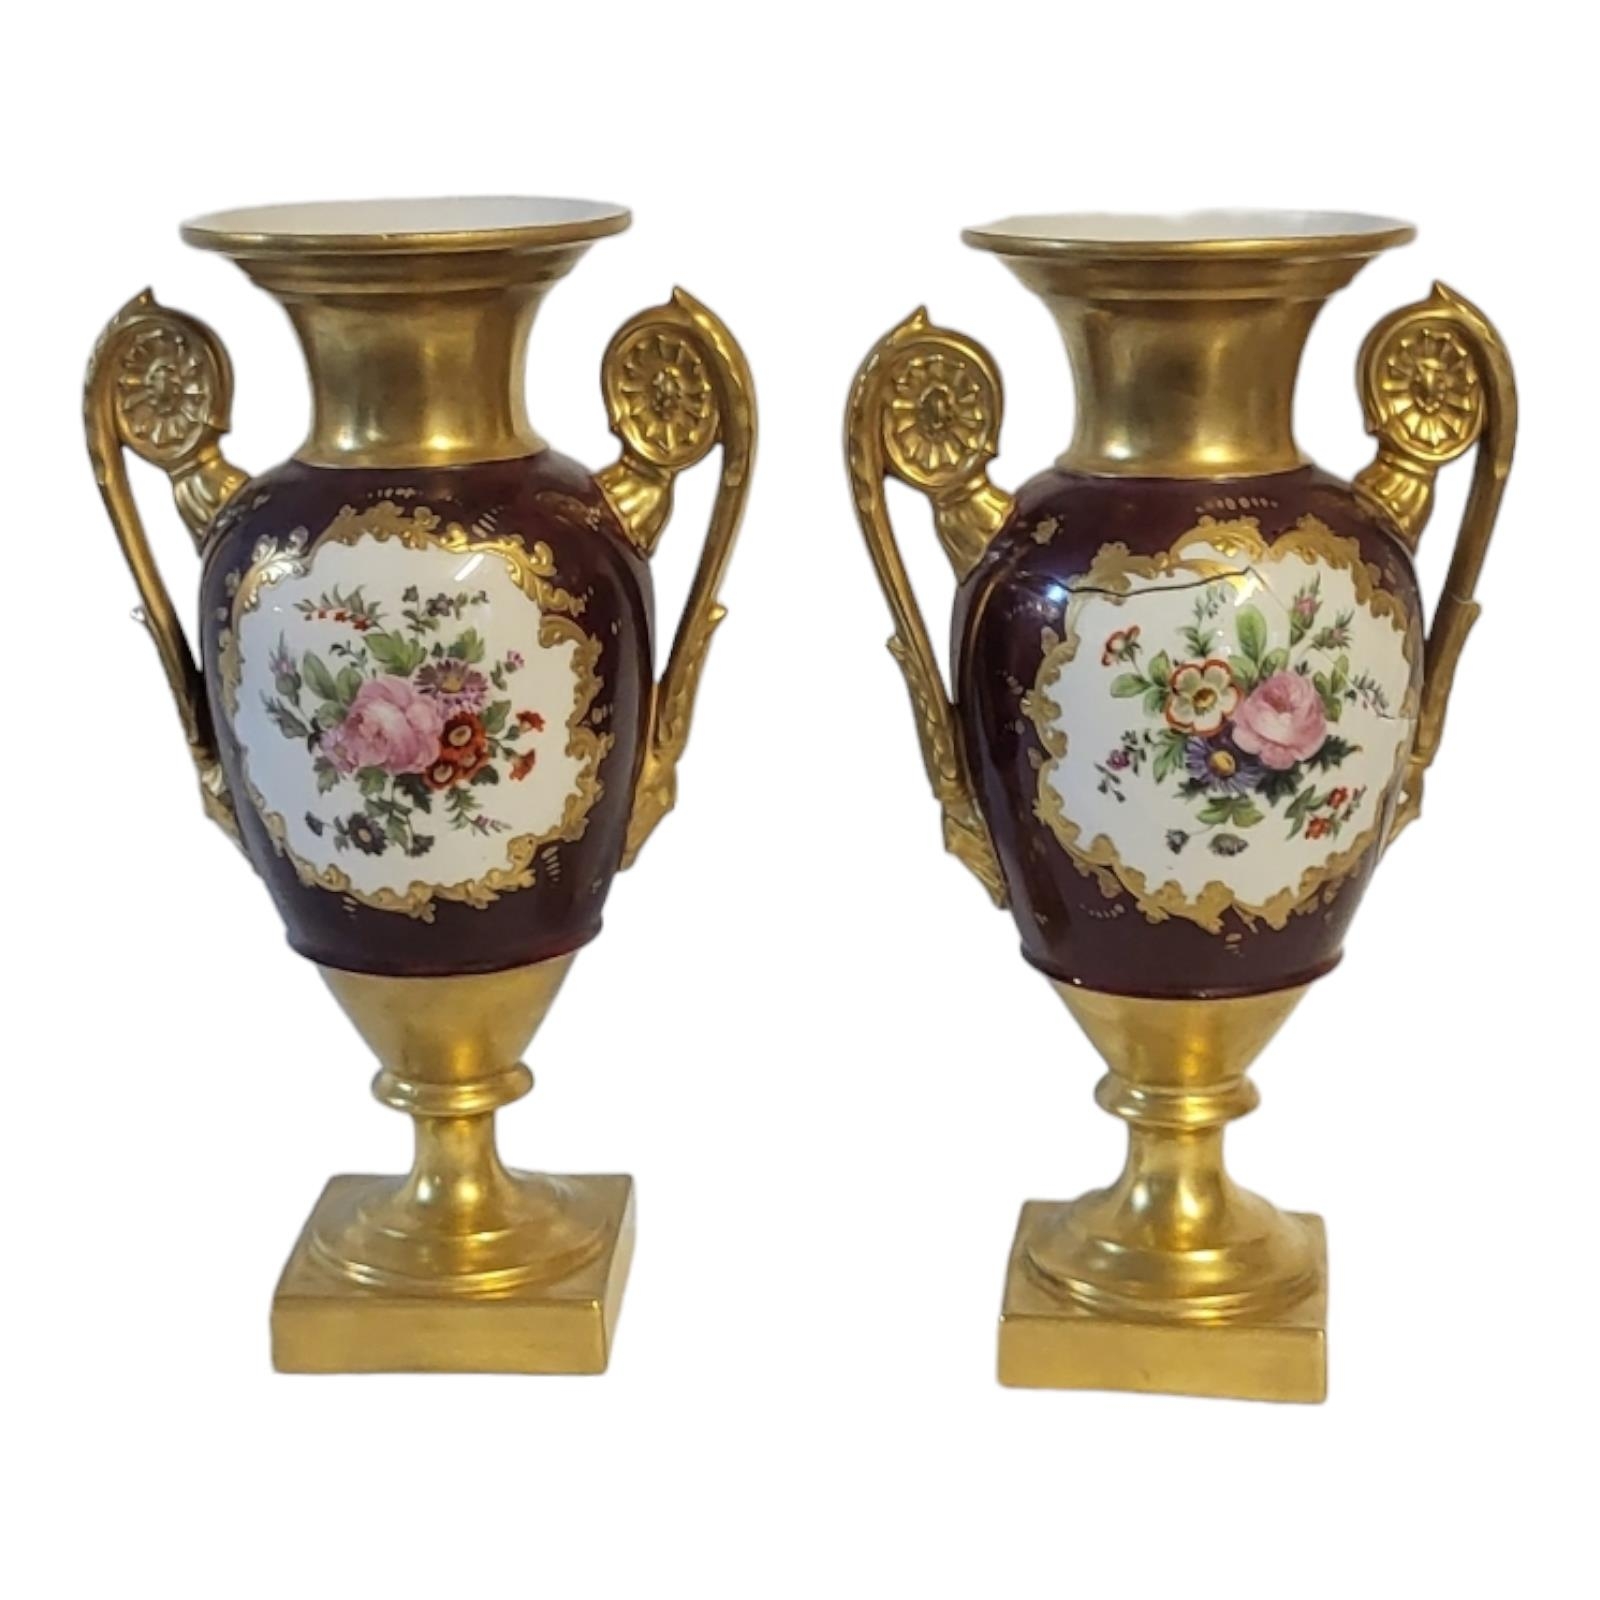 A PAIR OF EARLY 20TH CENTURY EMPIRE STYLE PARIS PORCELAIN JEWELLED TWIN HANDLED PEDESTAL VASES - Image 7 of 9